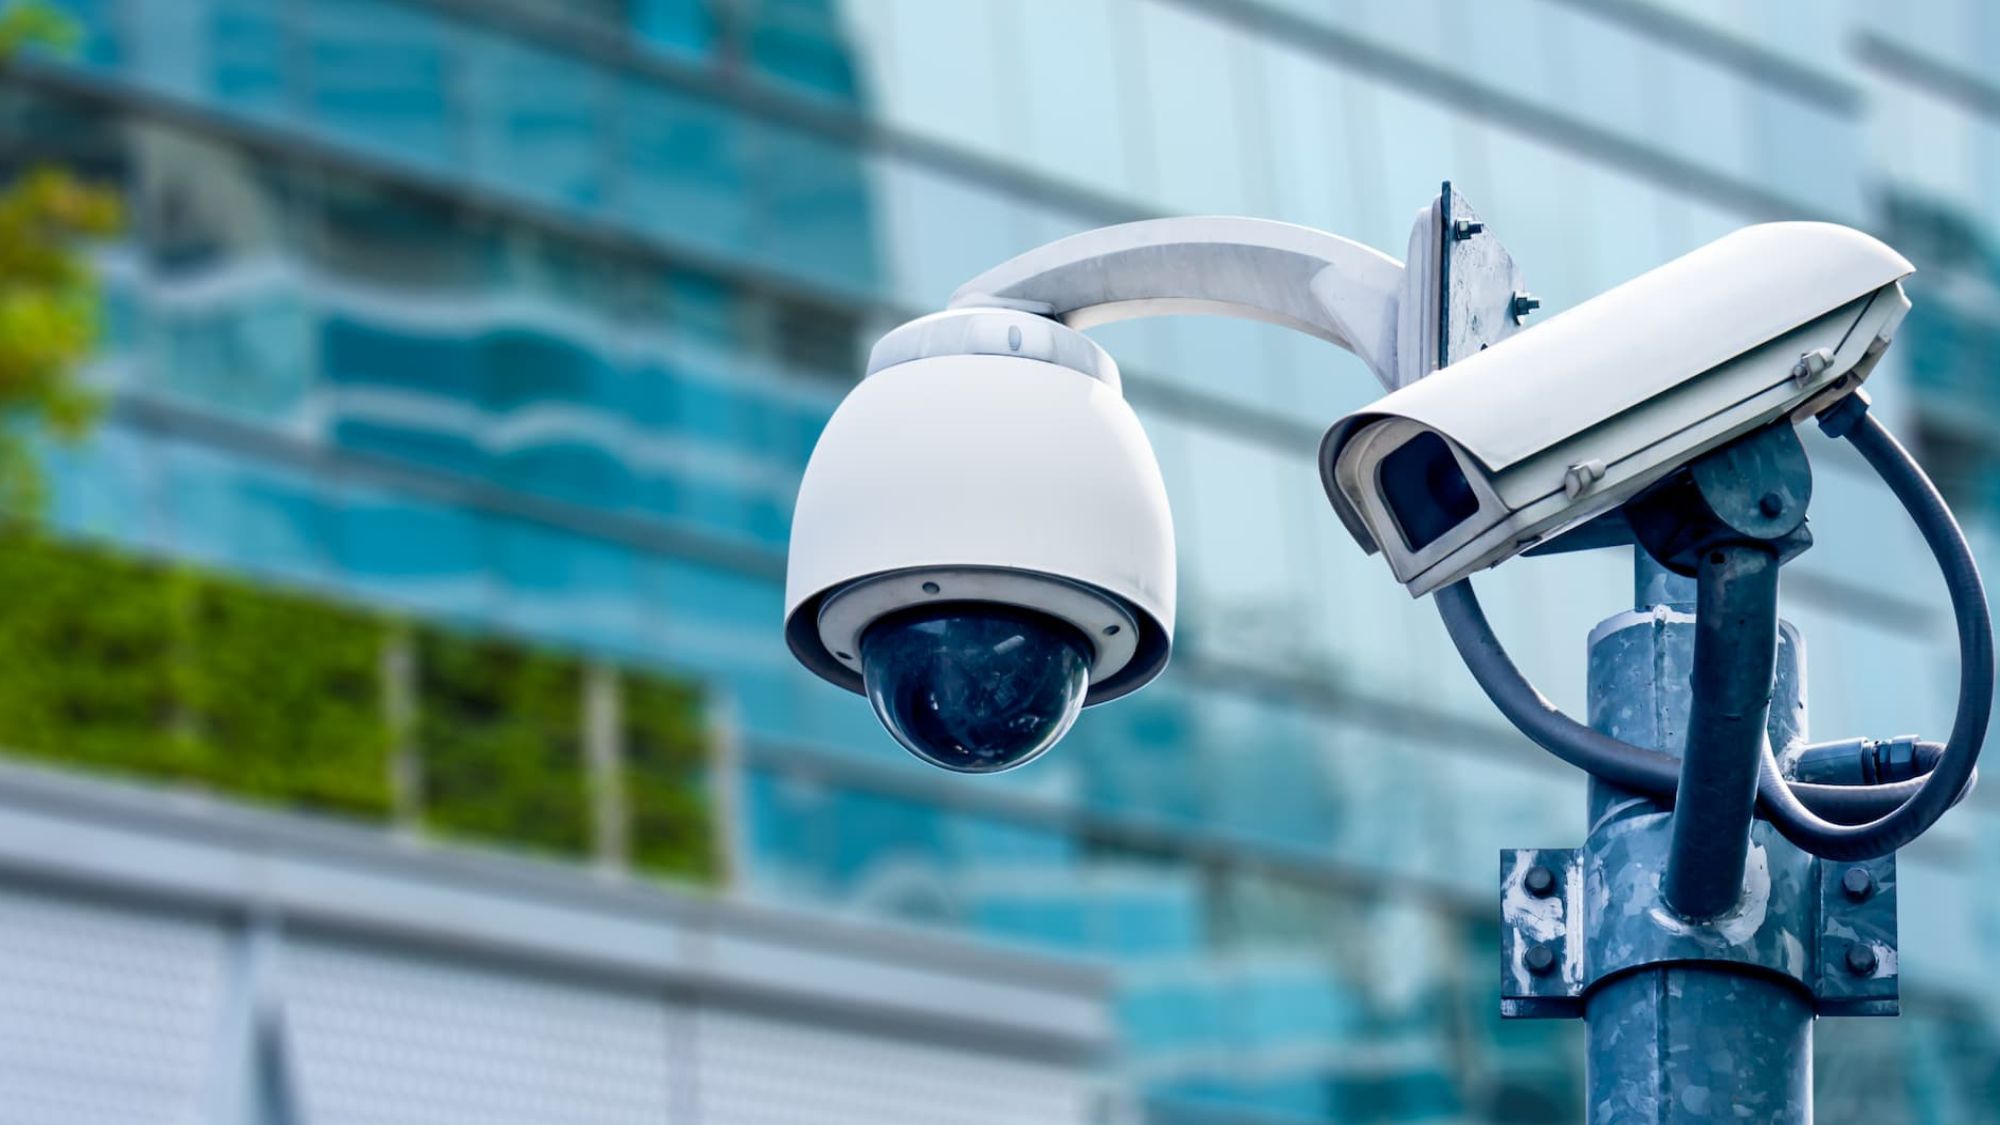 Smart CCTV Cameras monitoring on a workplace